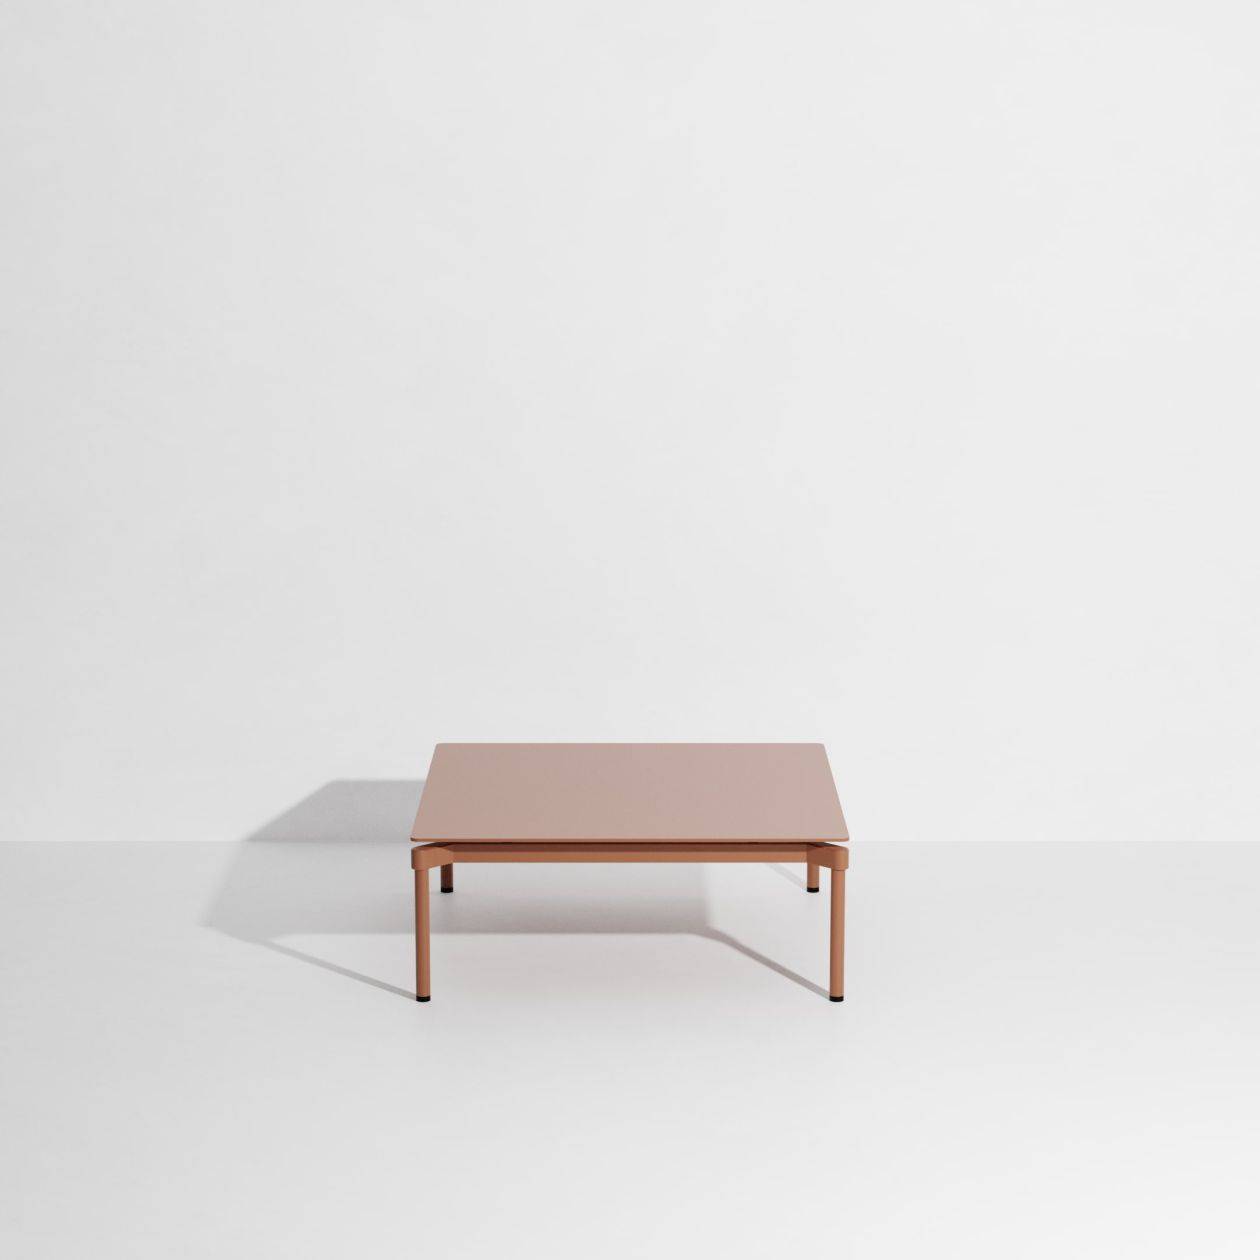 Fromme Coffee Table - Terracotta